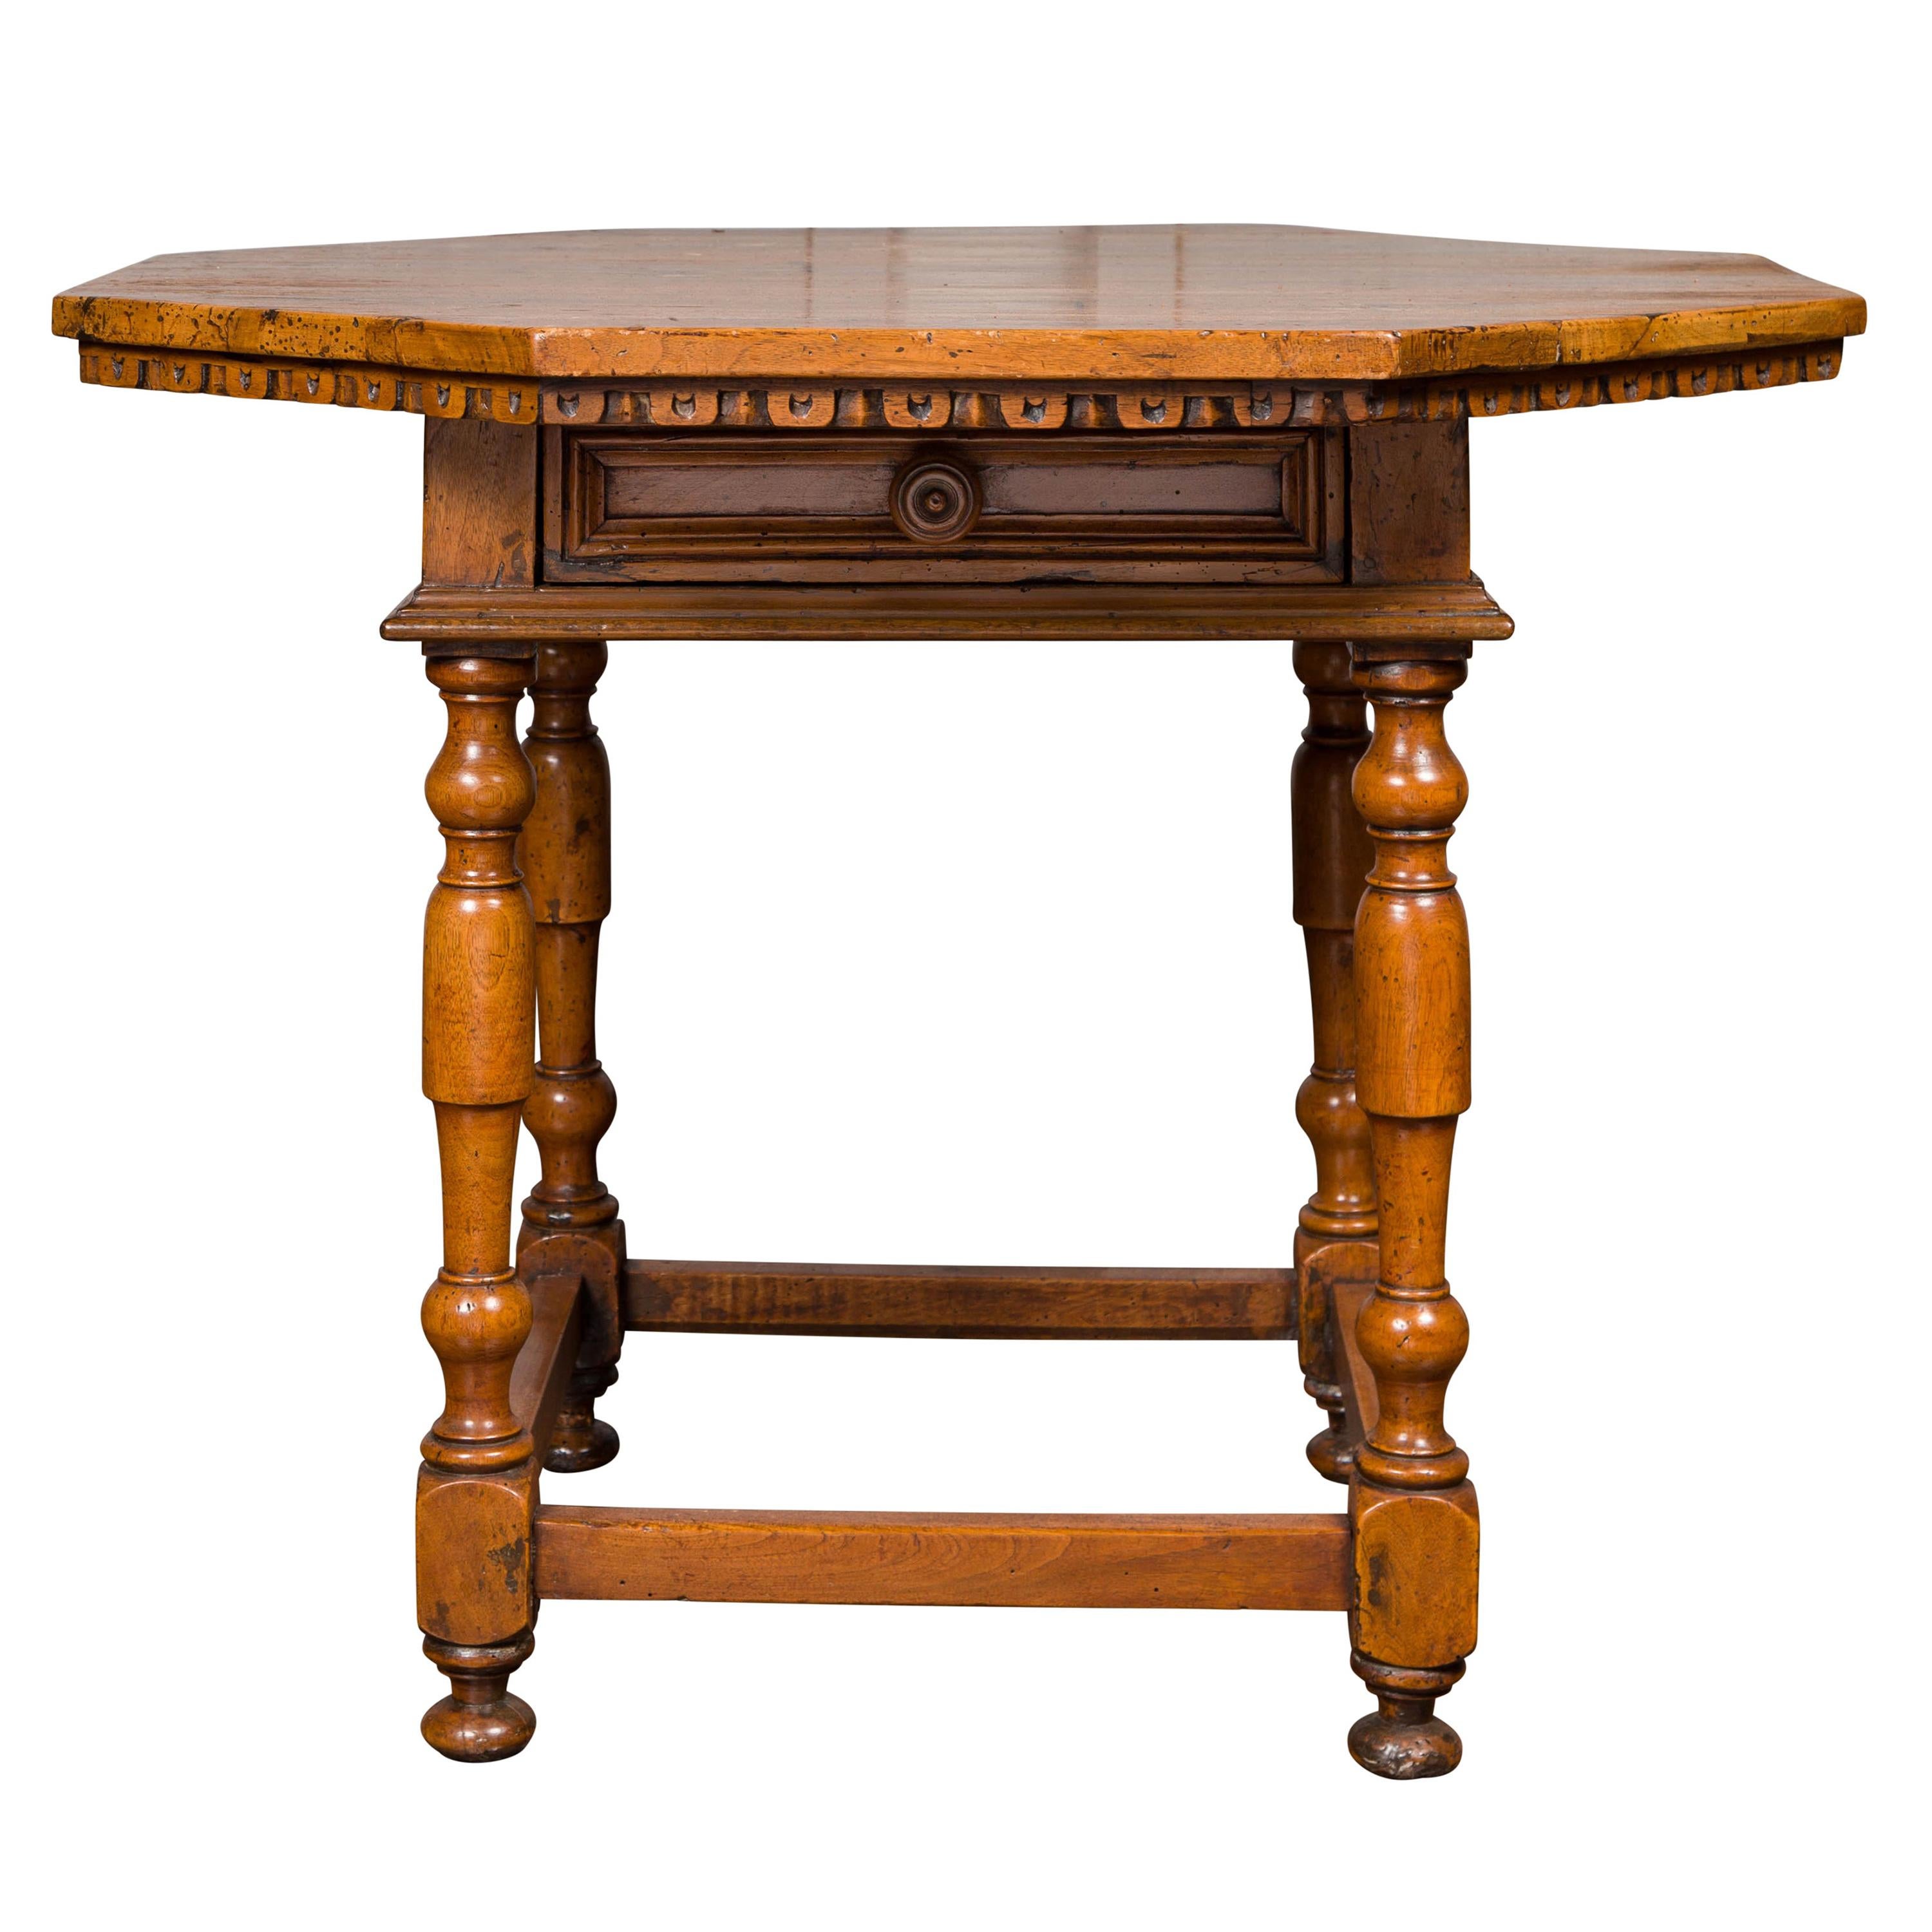 Italian 1820s Walnut Center Table with Octagonal Top and Single Drawer